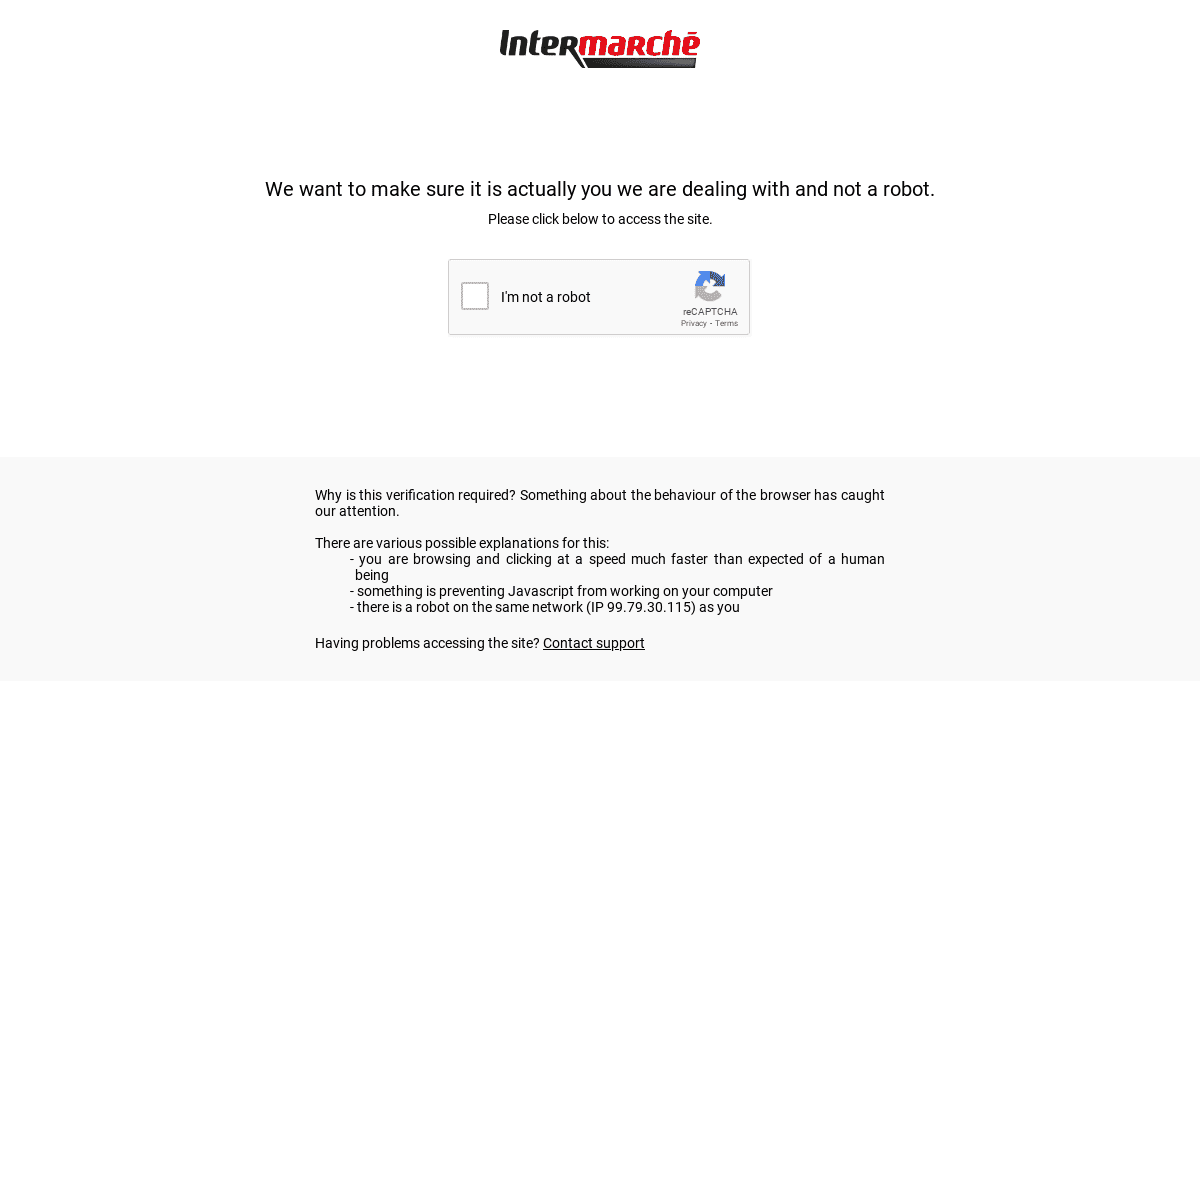 A complete backup of https://intermarche.com